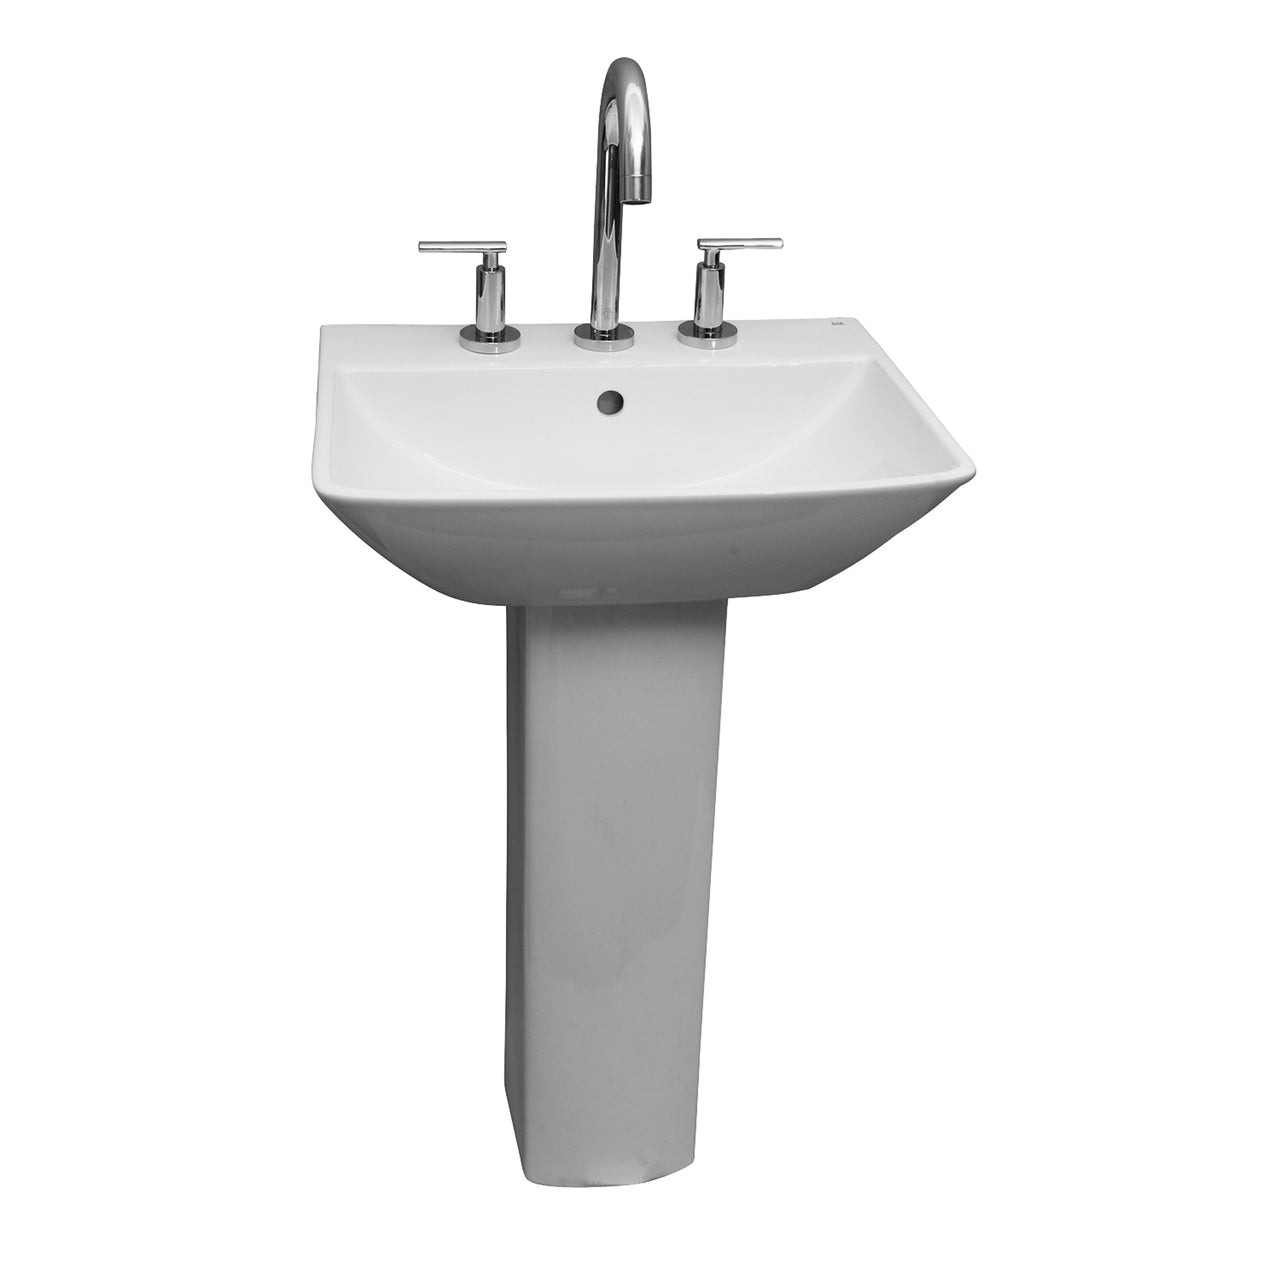 Summit 500 Pedestal Bathroom Sink White for 1-Hole Faucet